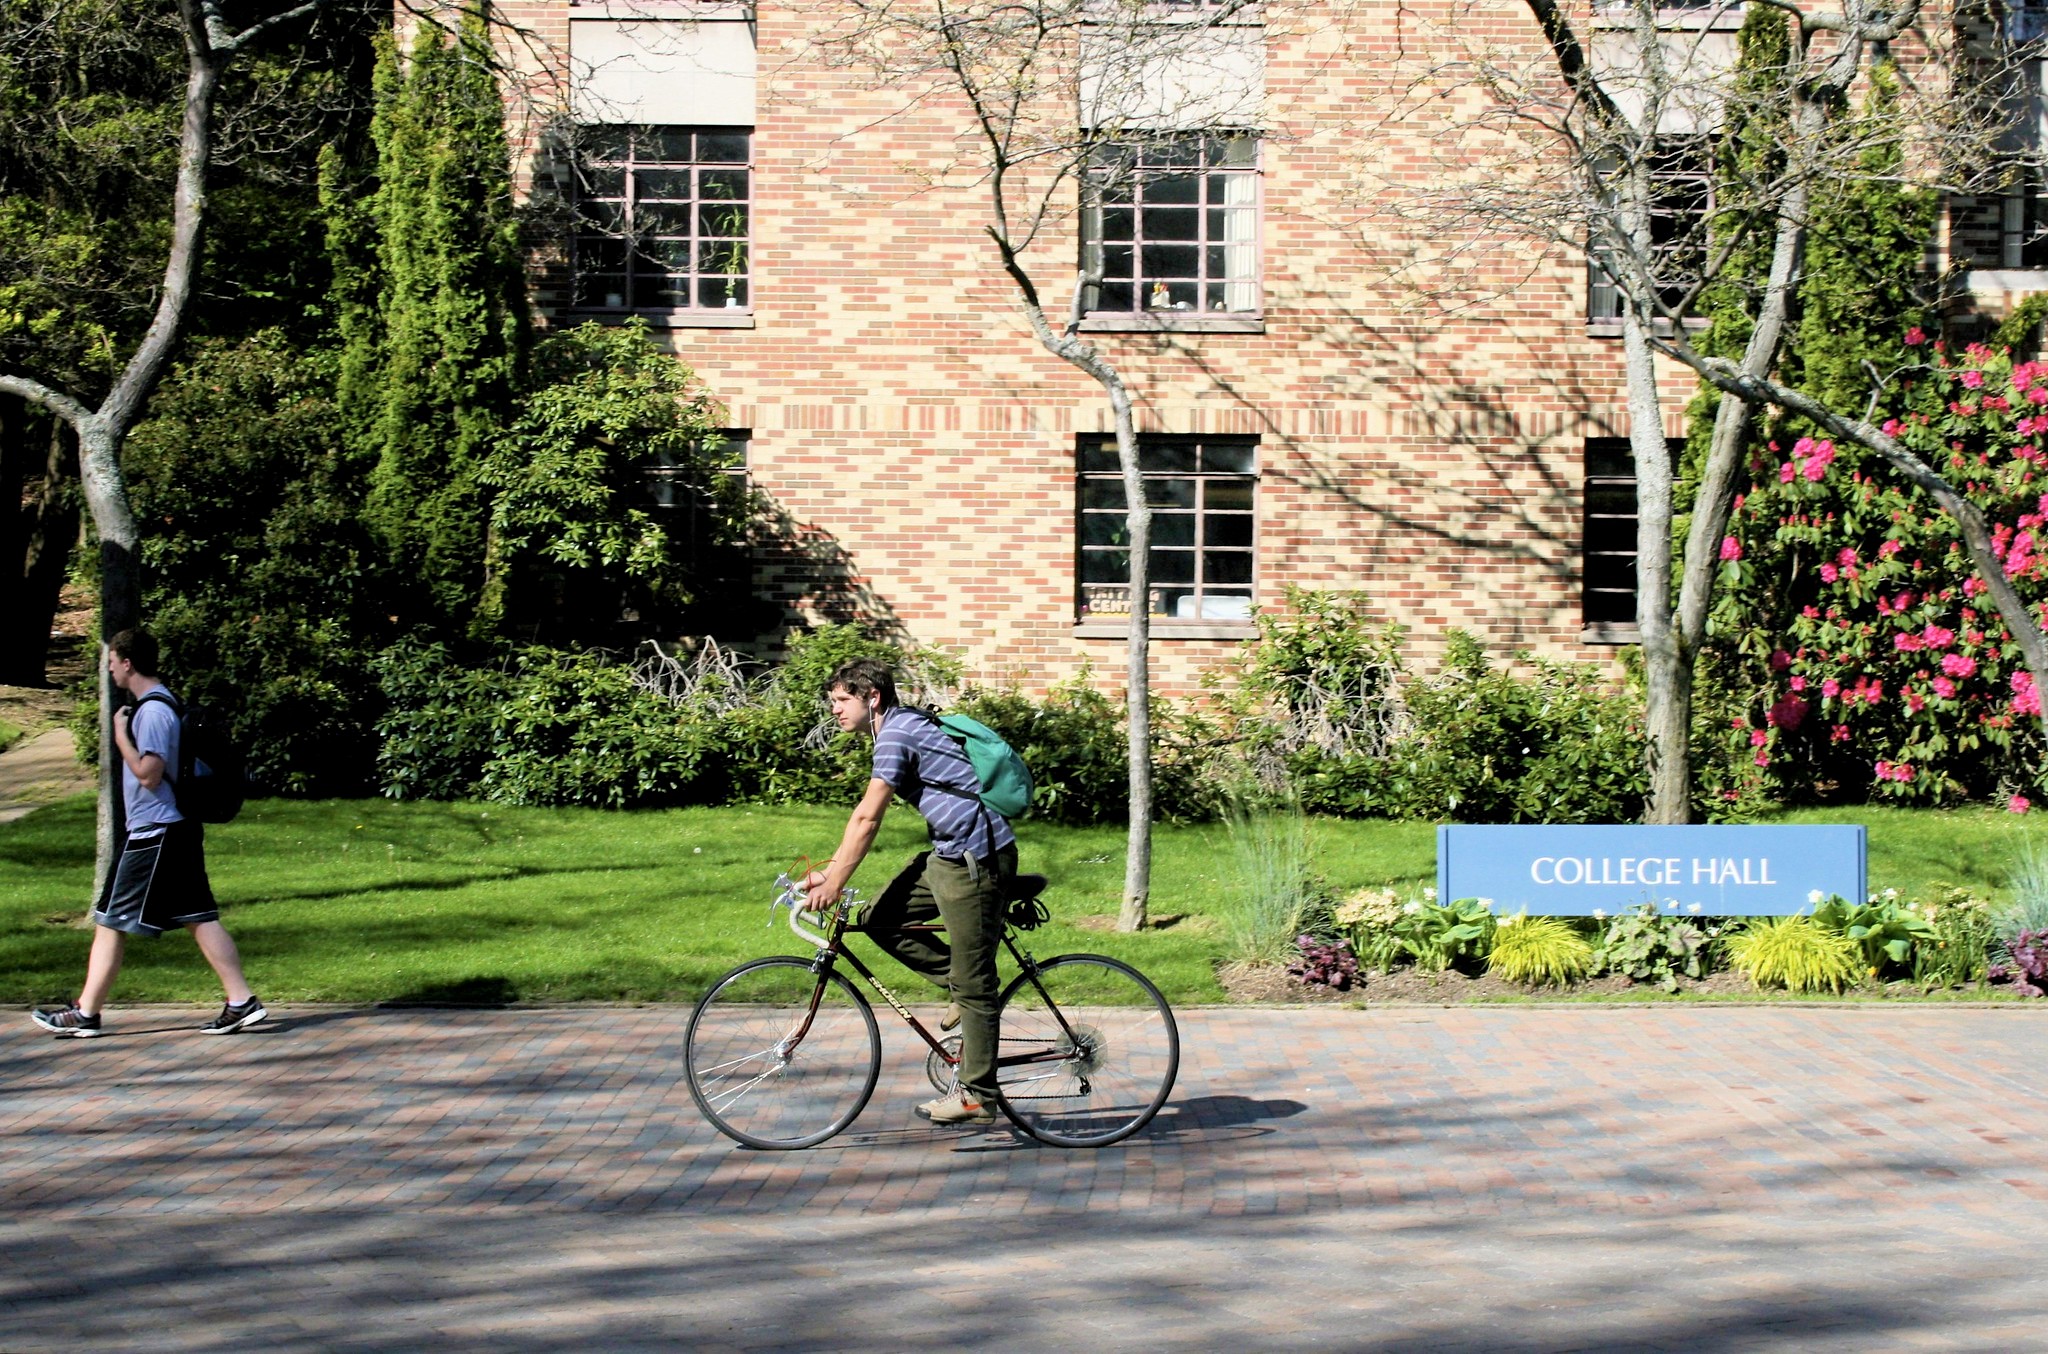 A student rides his bike past College Hall on a sunny day